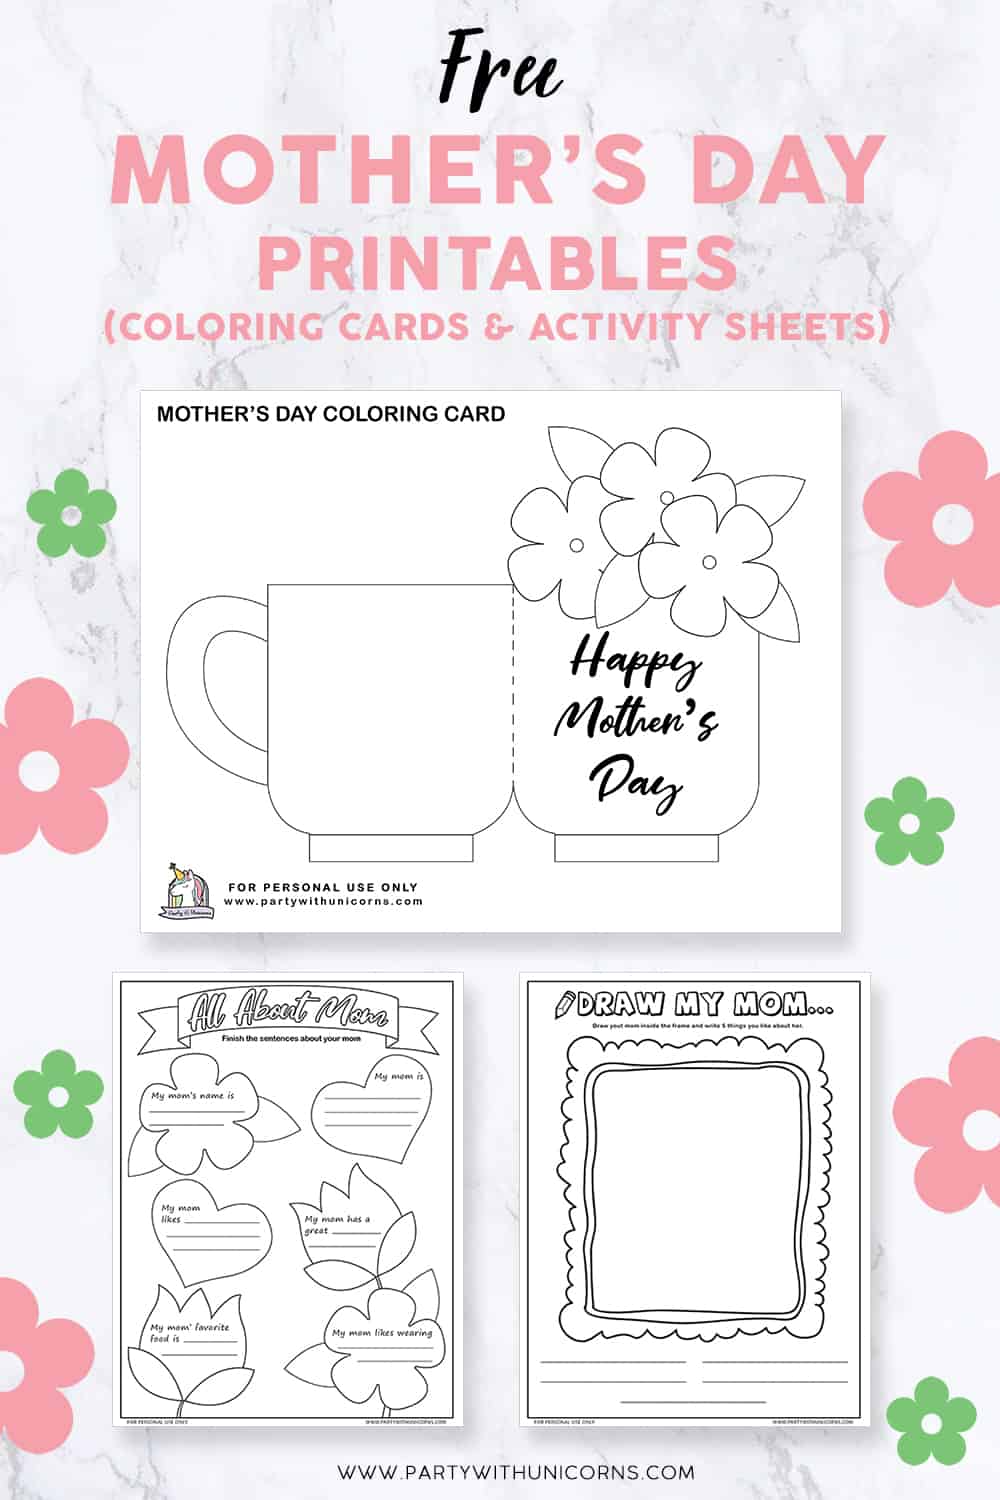 Free Mother's Day Printables images